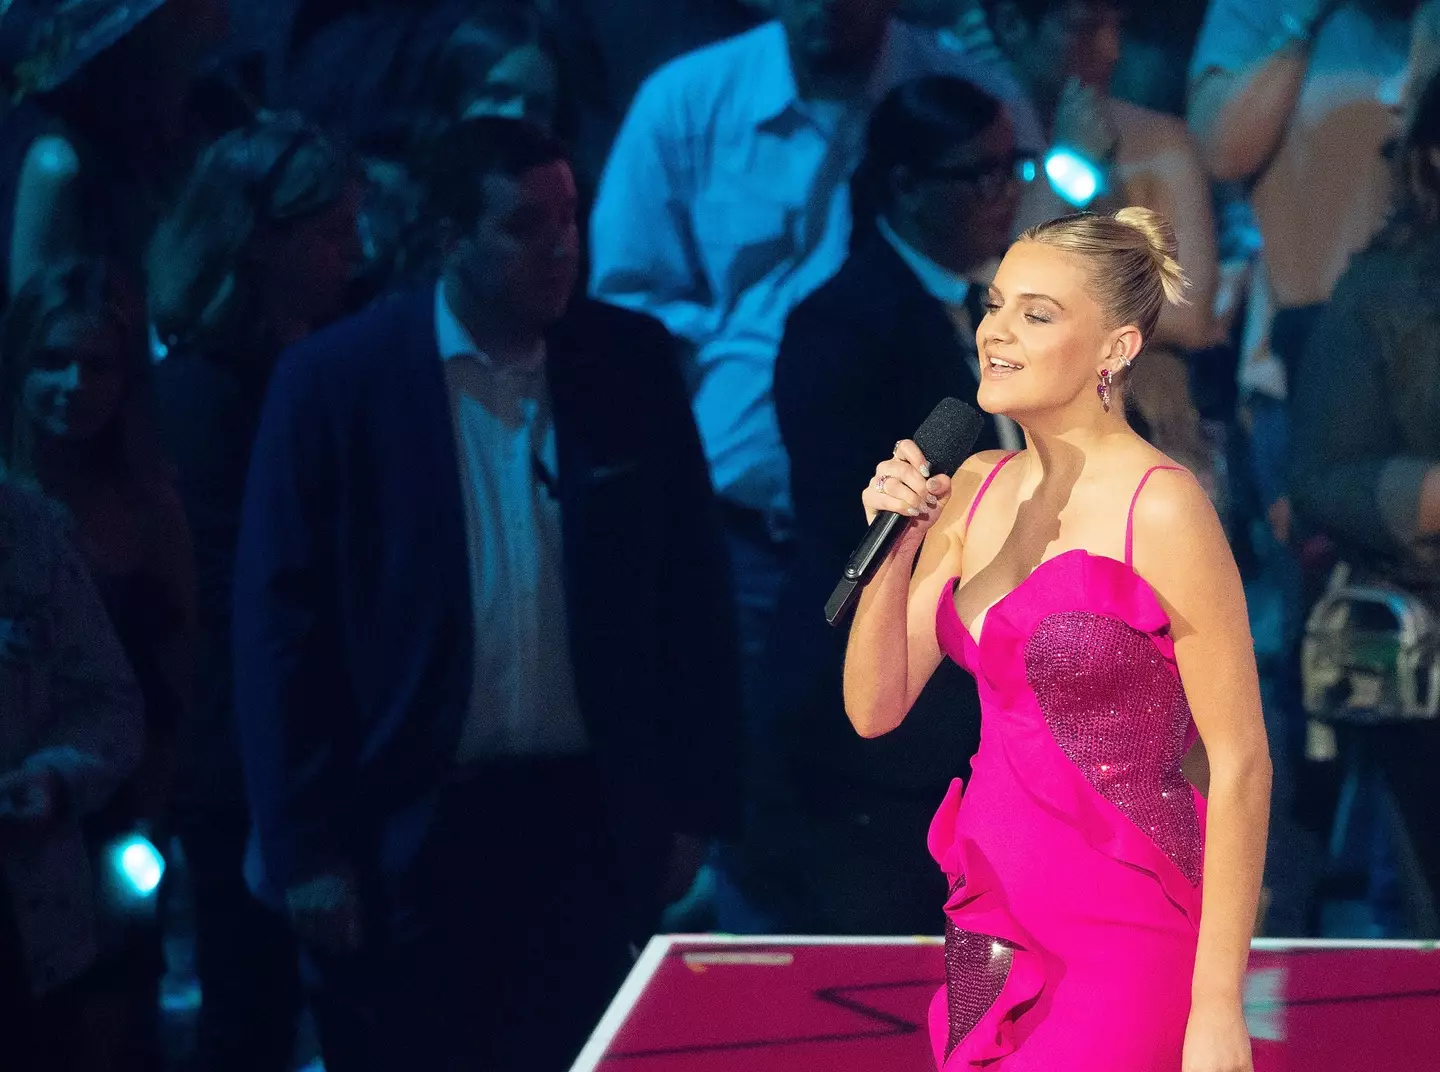 Kelsea Ballerini delivered a lot of powerful messages at the CMT Music Awards.